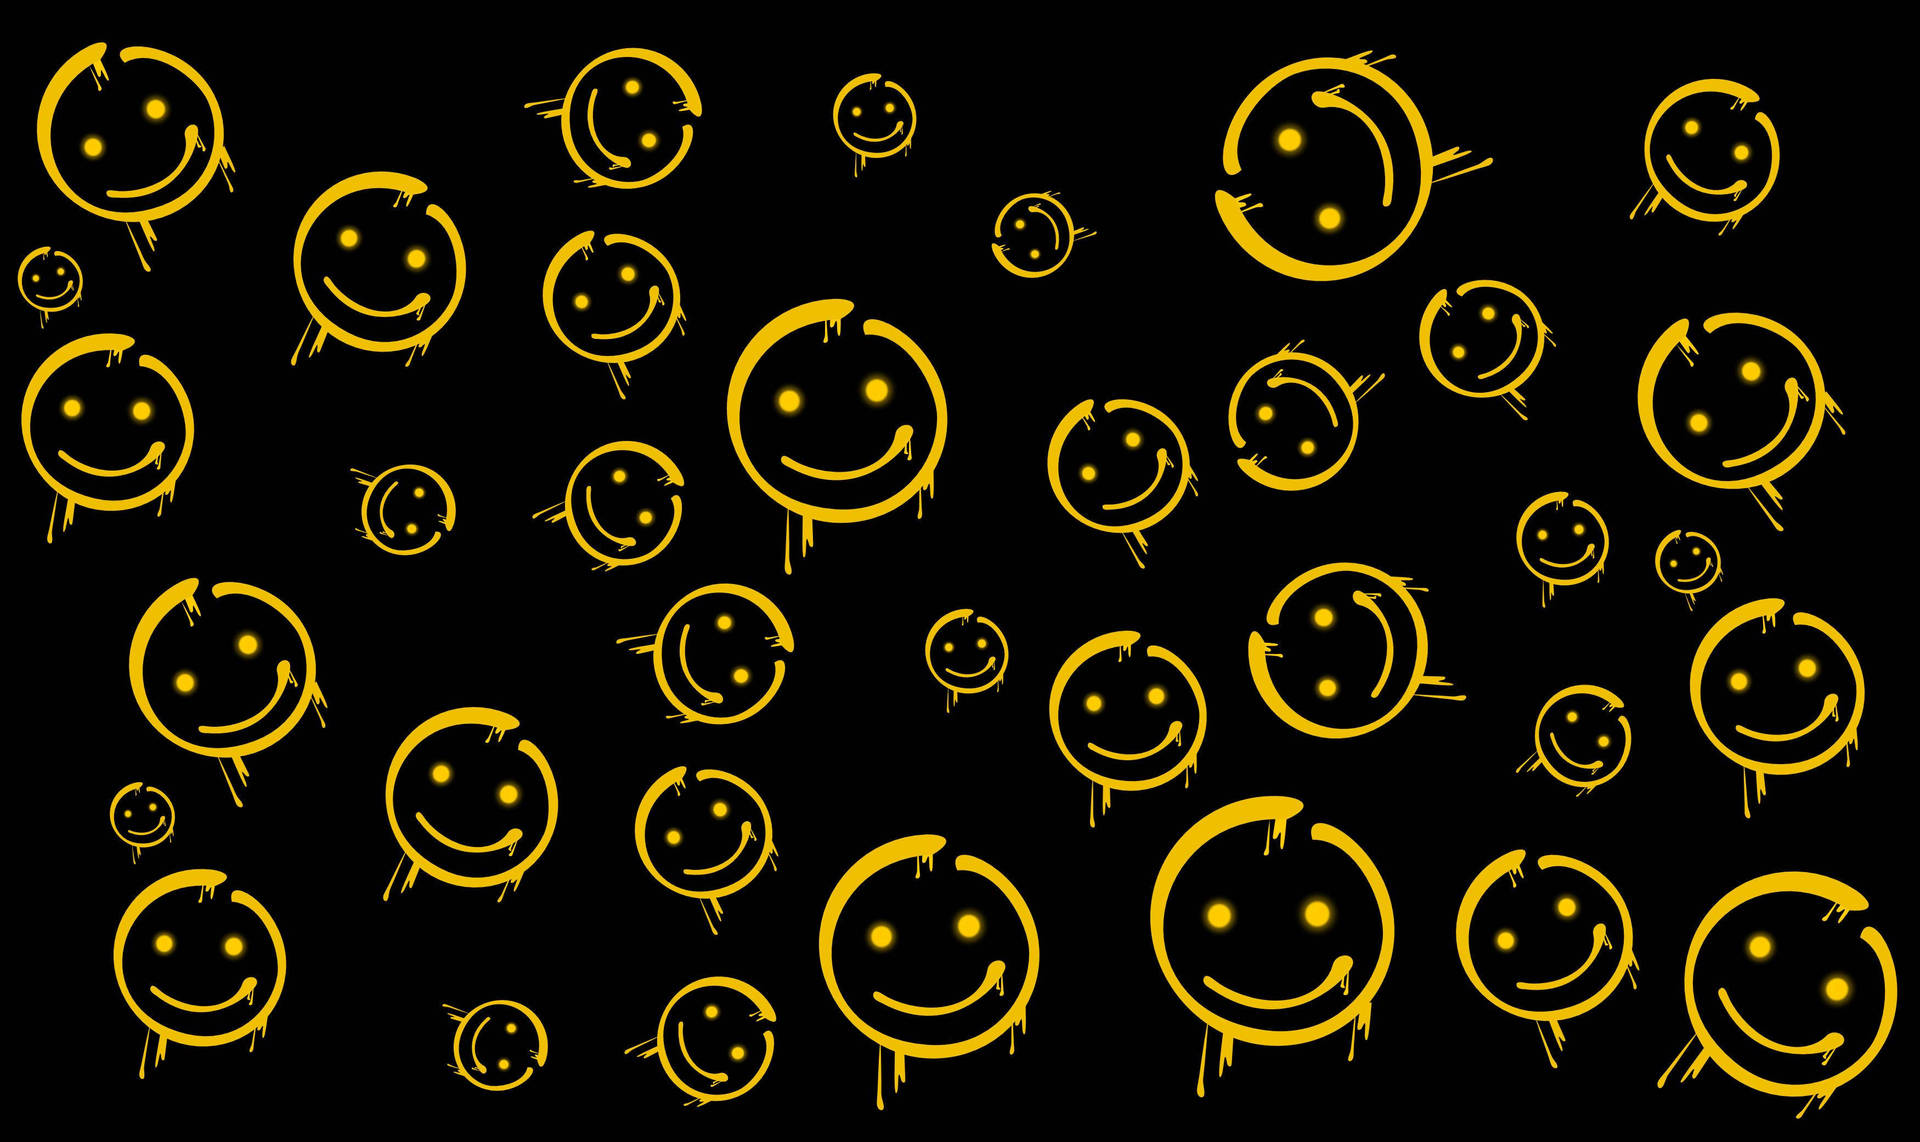 Black And Yellow Preppy Smiley Face Wallpaper